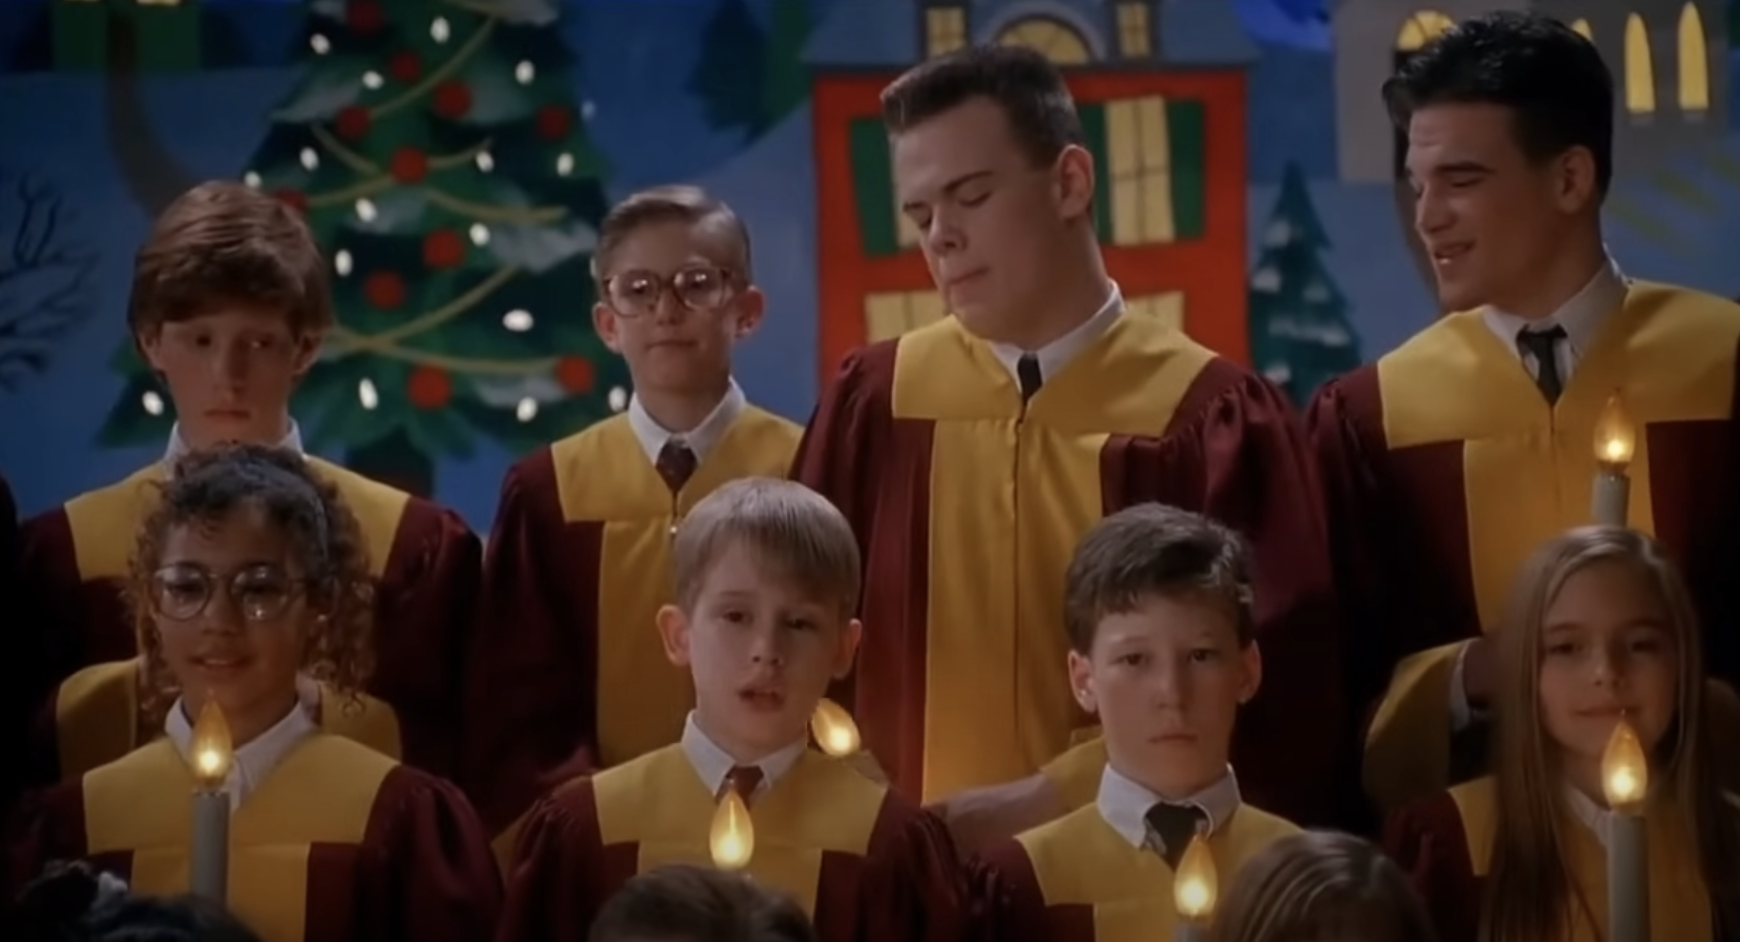 The choir scene with children and teenagers in yellow and red robes